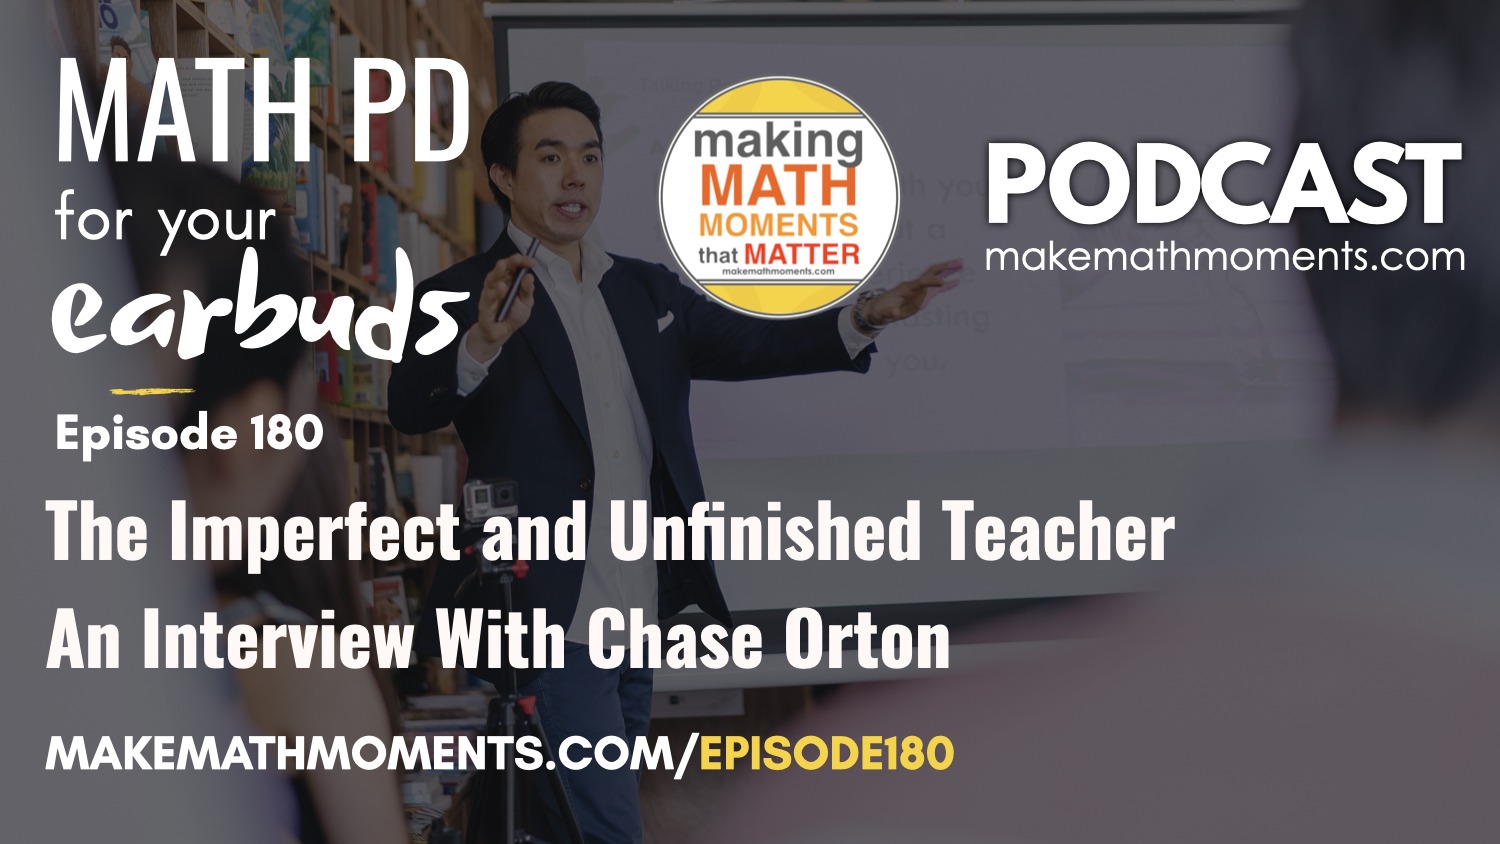 Episode 180: The Imperfect and Unfinished Teacher – An Interview With Chase Orton